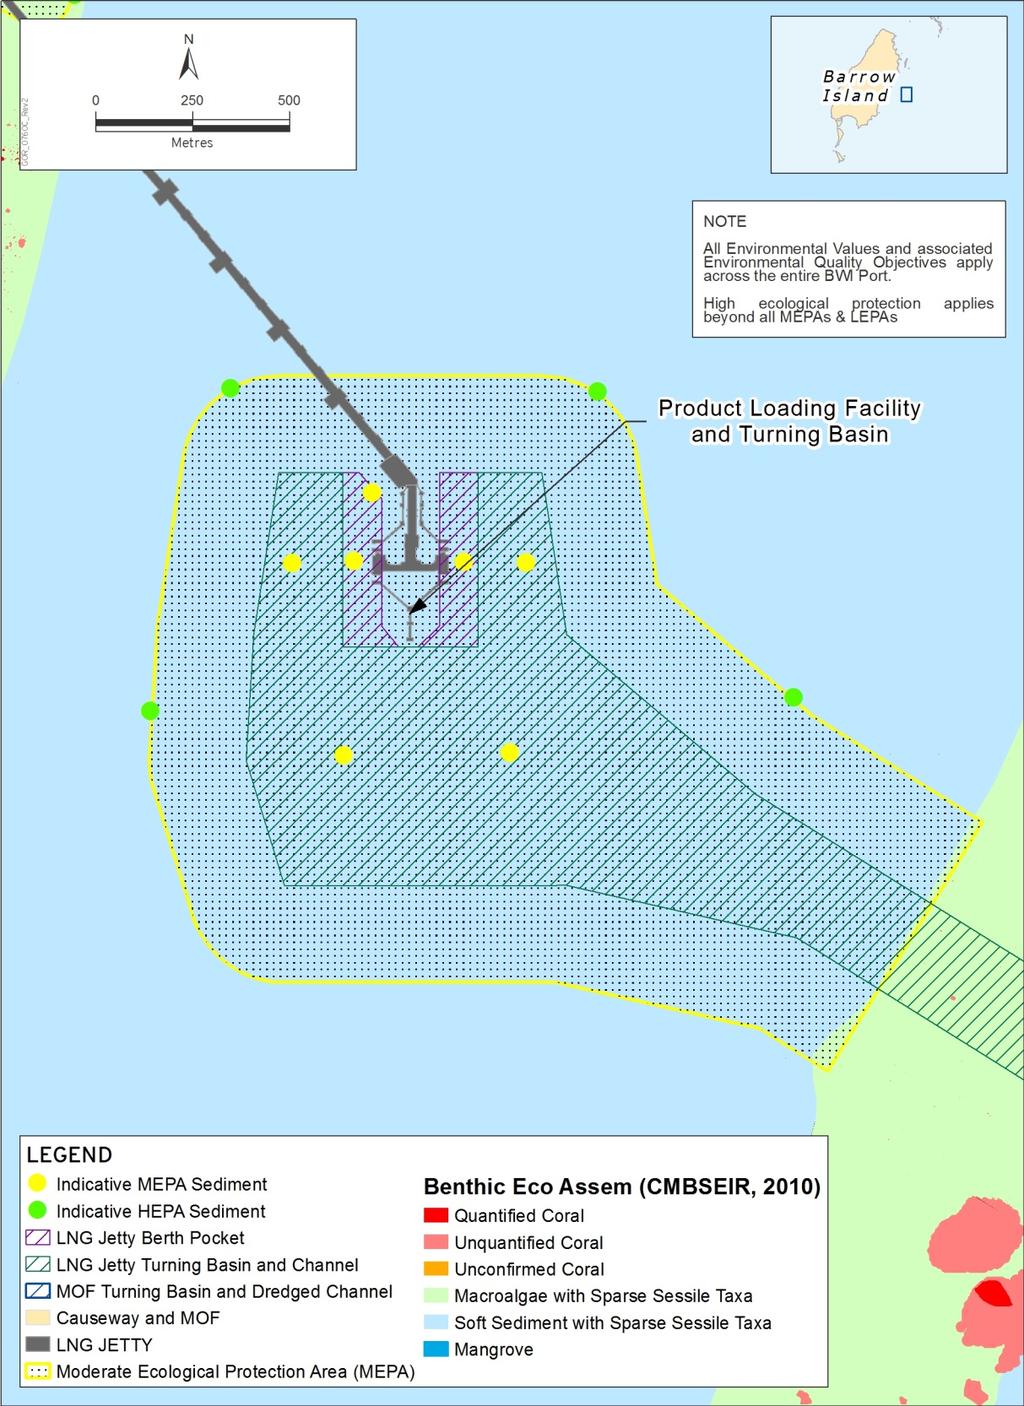 Figure 8-2: Indicative Locations of Routine Sediment Sampling Sites at the LNG Jetty Notes: Reference sites are not